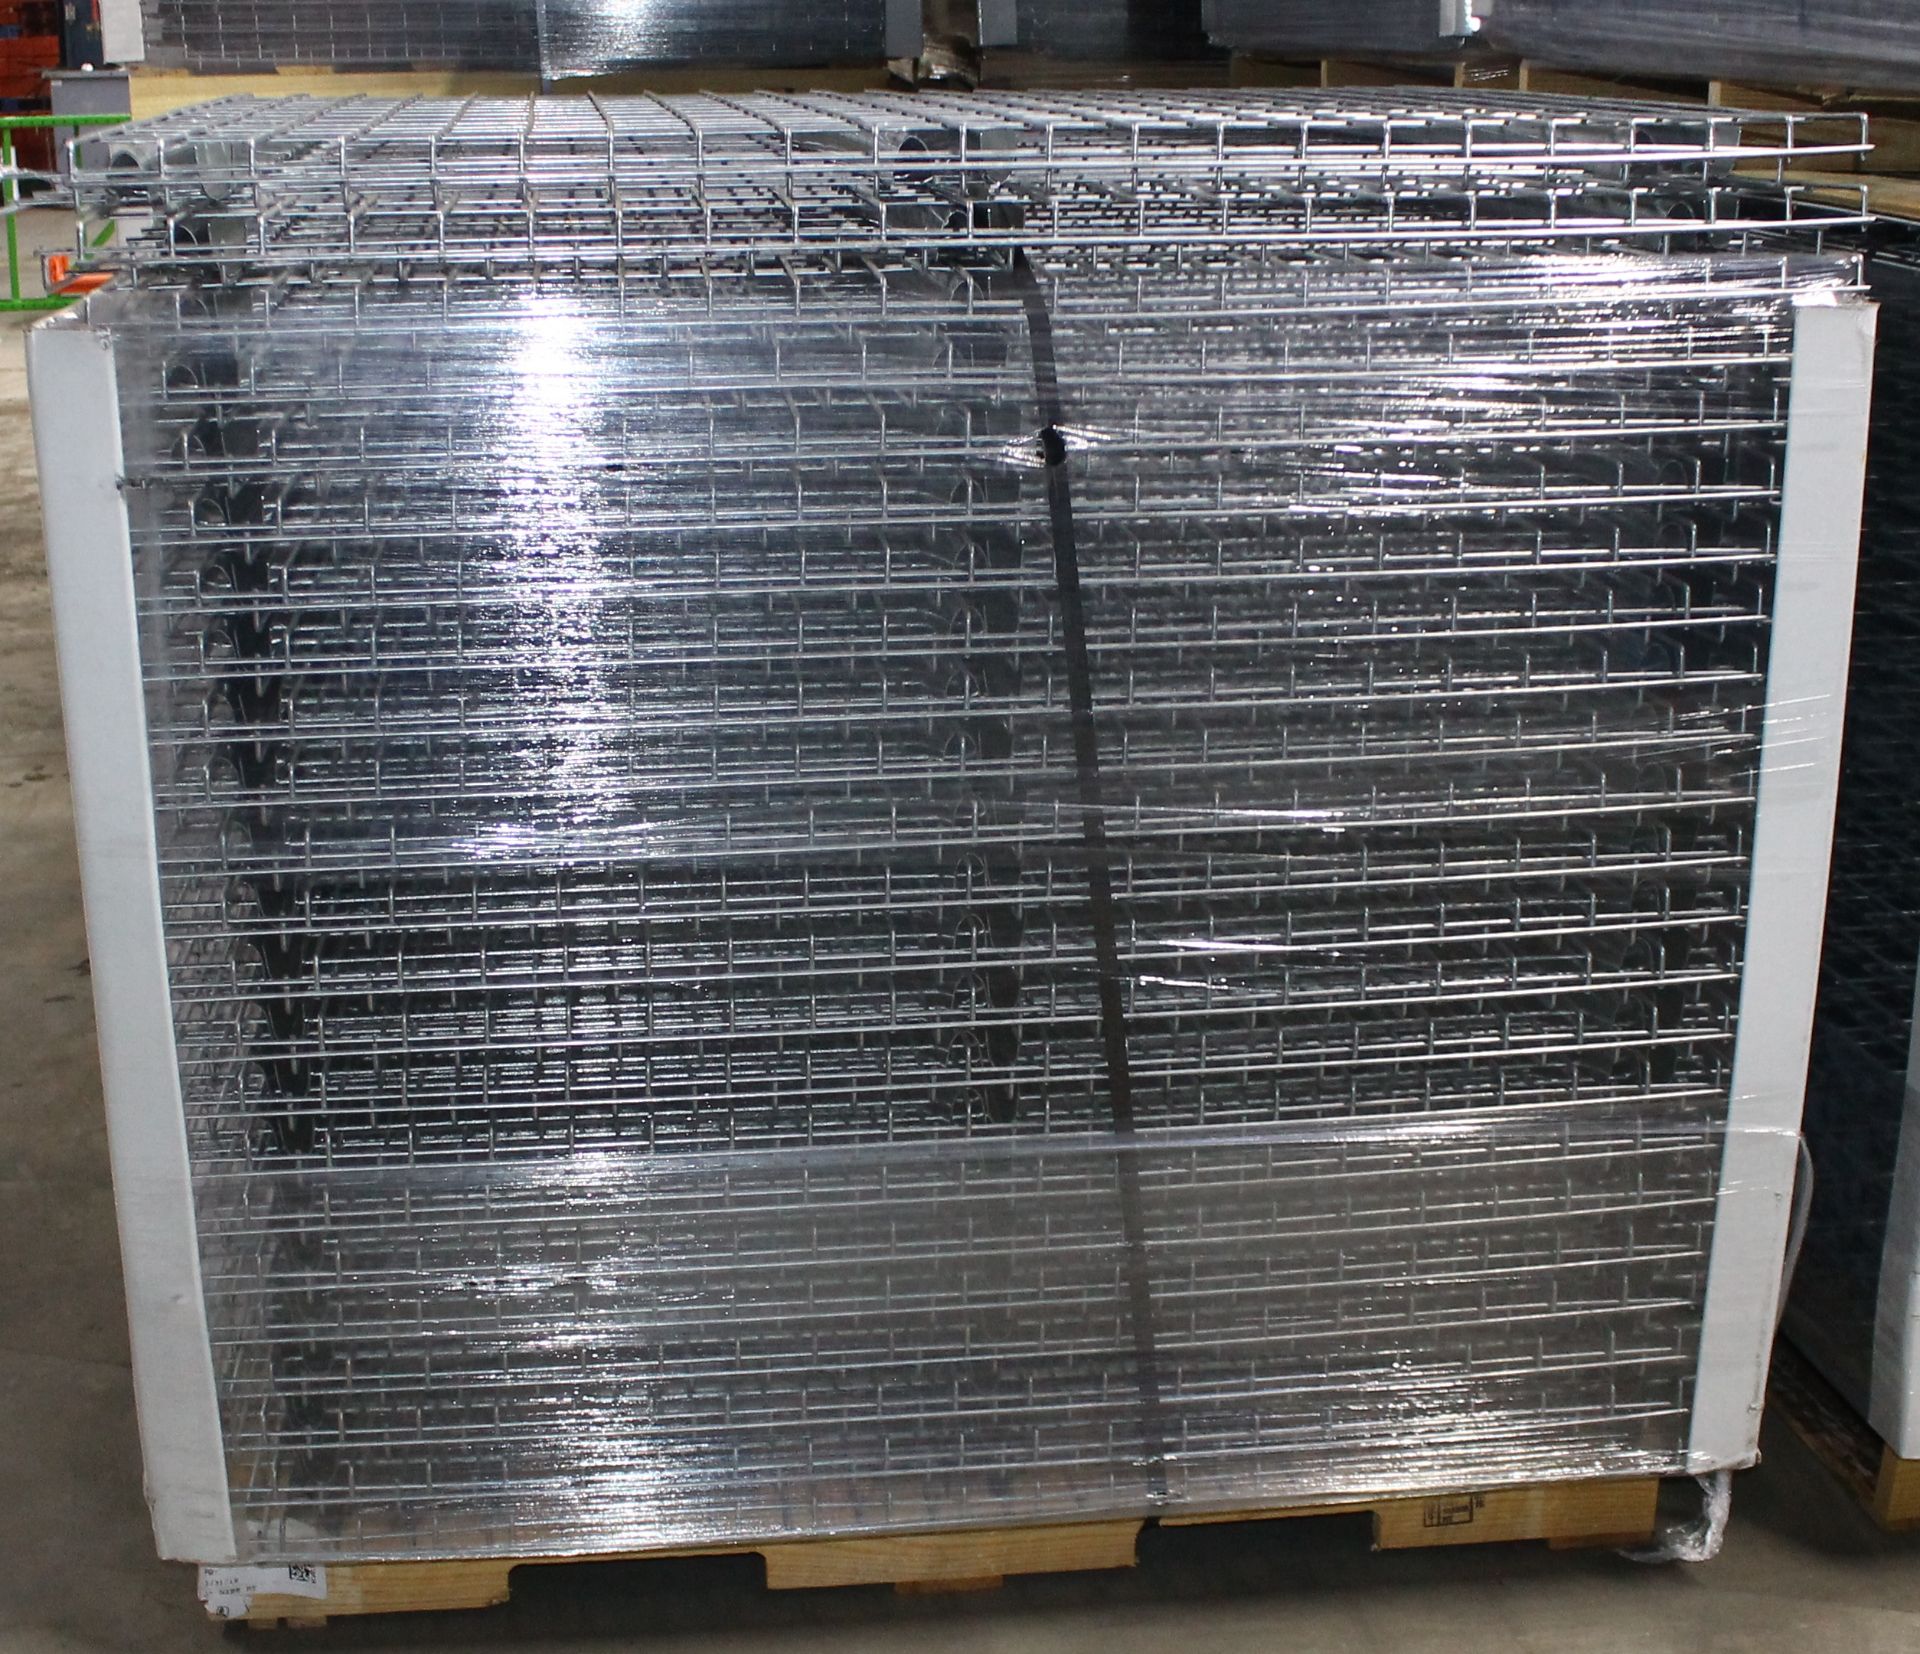 NEW 120 PCS OF STANDARD 48" X 46" WIREDECK - 1900 LBS CAPACITY - Image 2 of 2